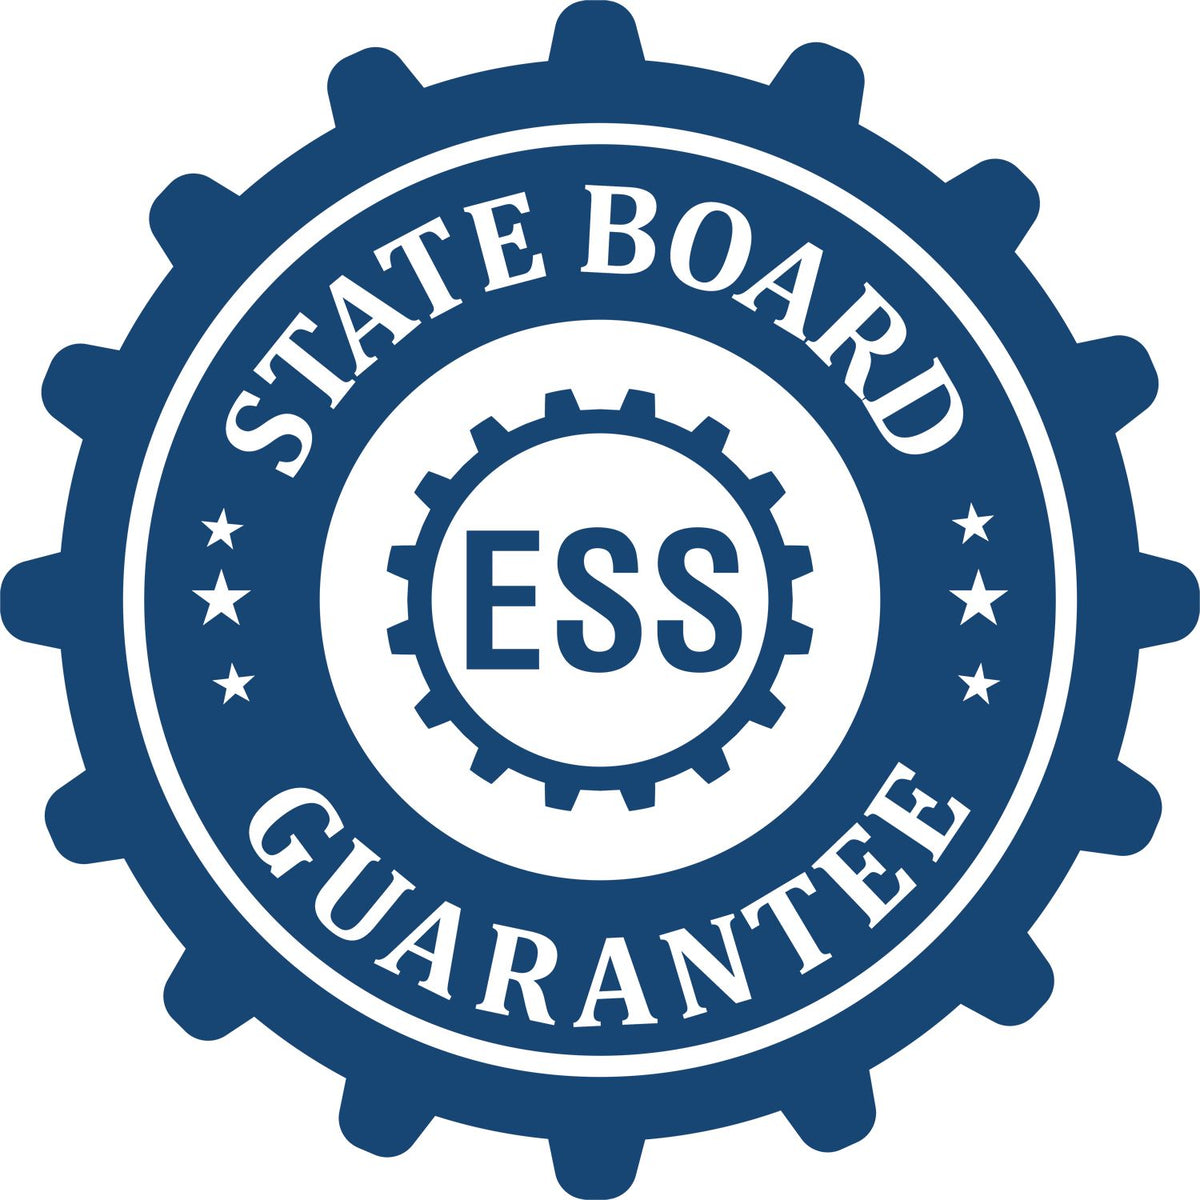 An emblem in a gear shape illustrating a state board guarantee for the Gift Hawaii Land Surveyor Seal